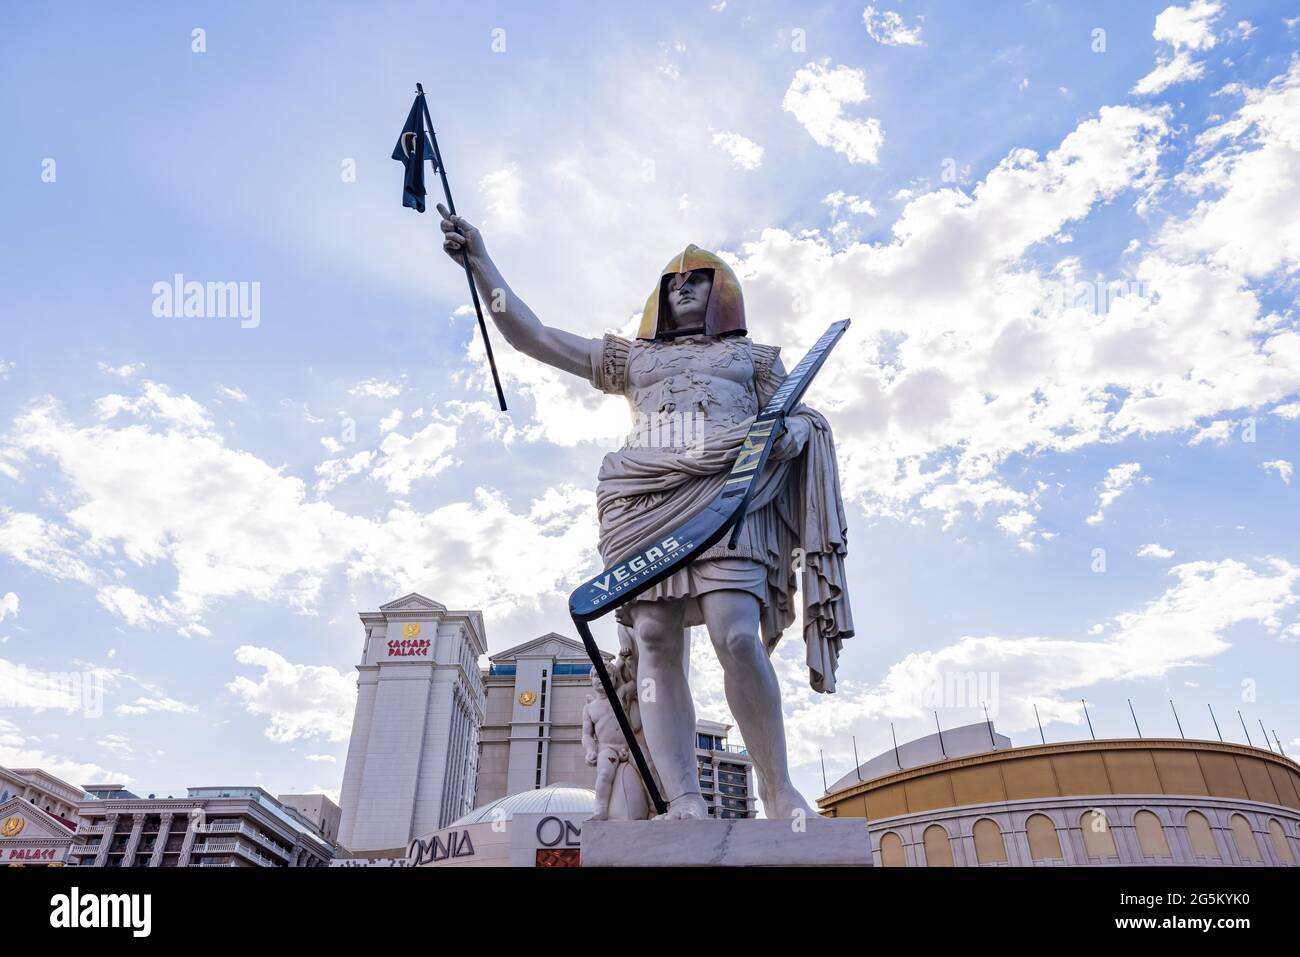 Statue in front of Caesars Palace donning Golden Knights jersey